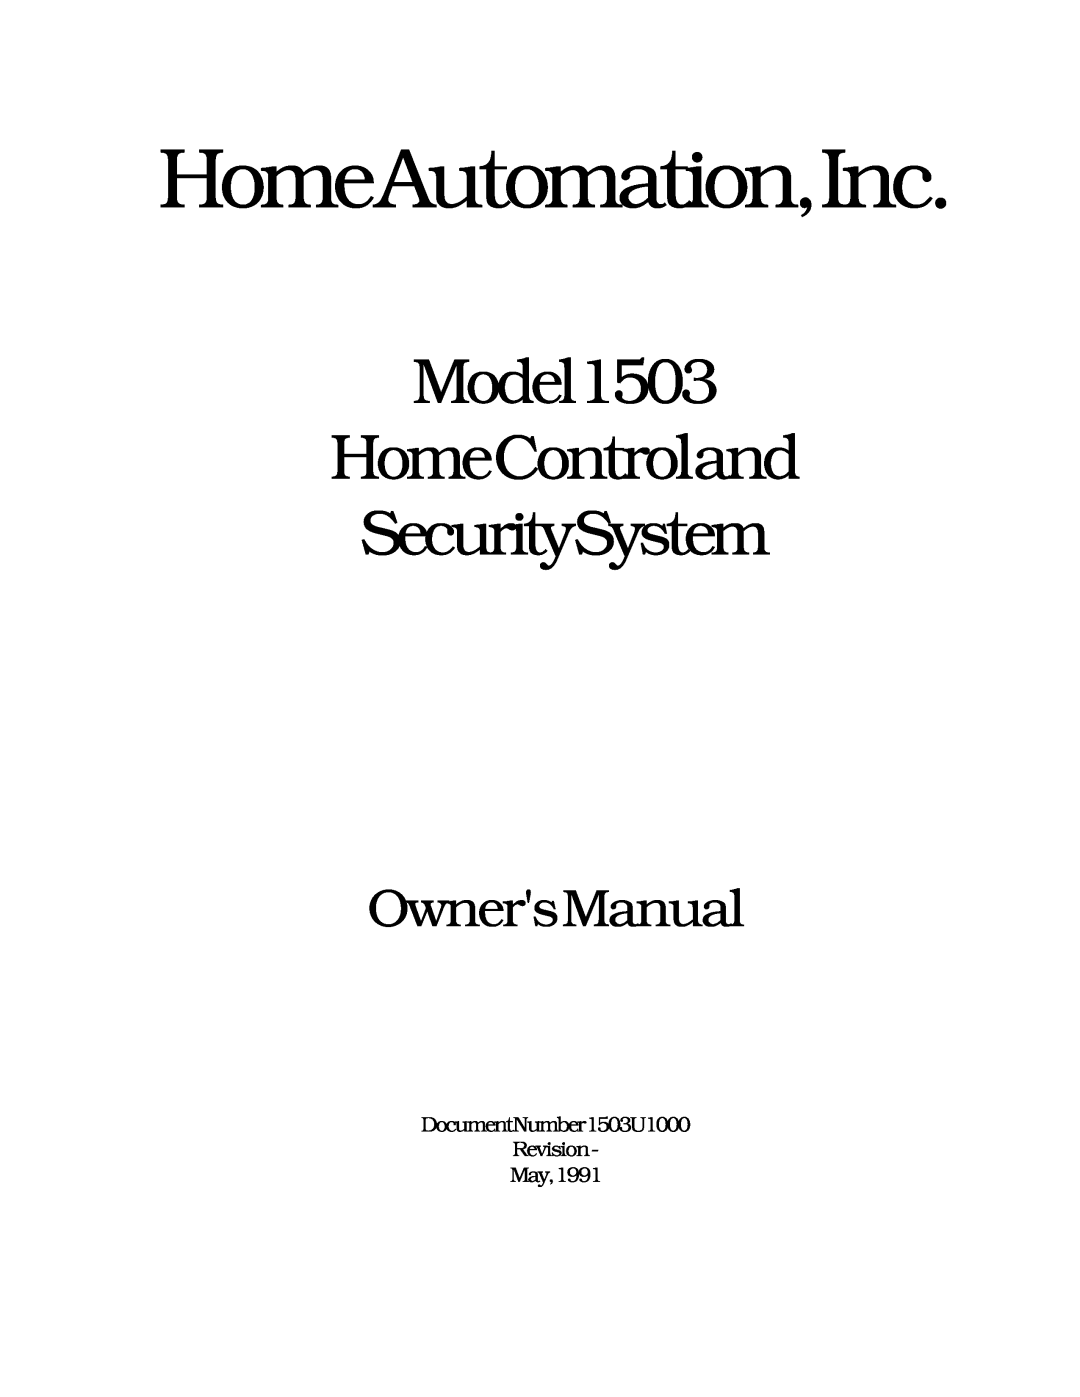 Home Automation owner manual HomeAutomation,Inc, Model1503 HomeControland SecuritySystem, OwnersManual 